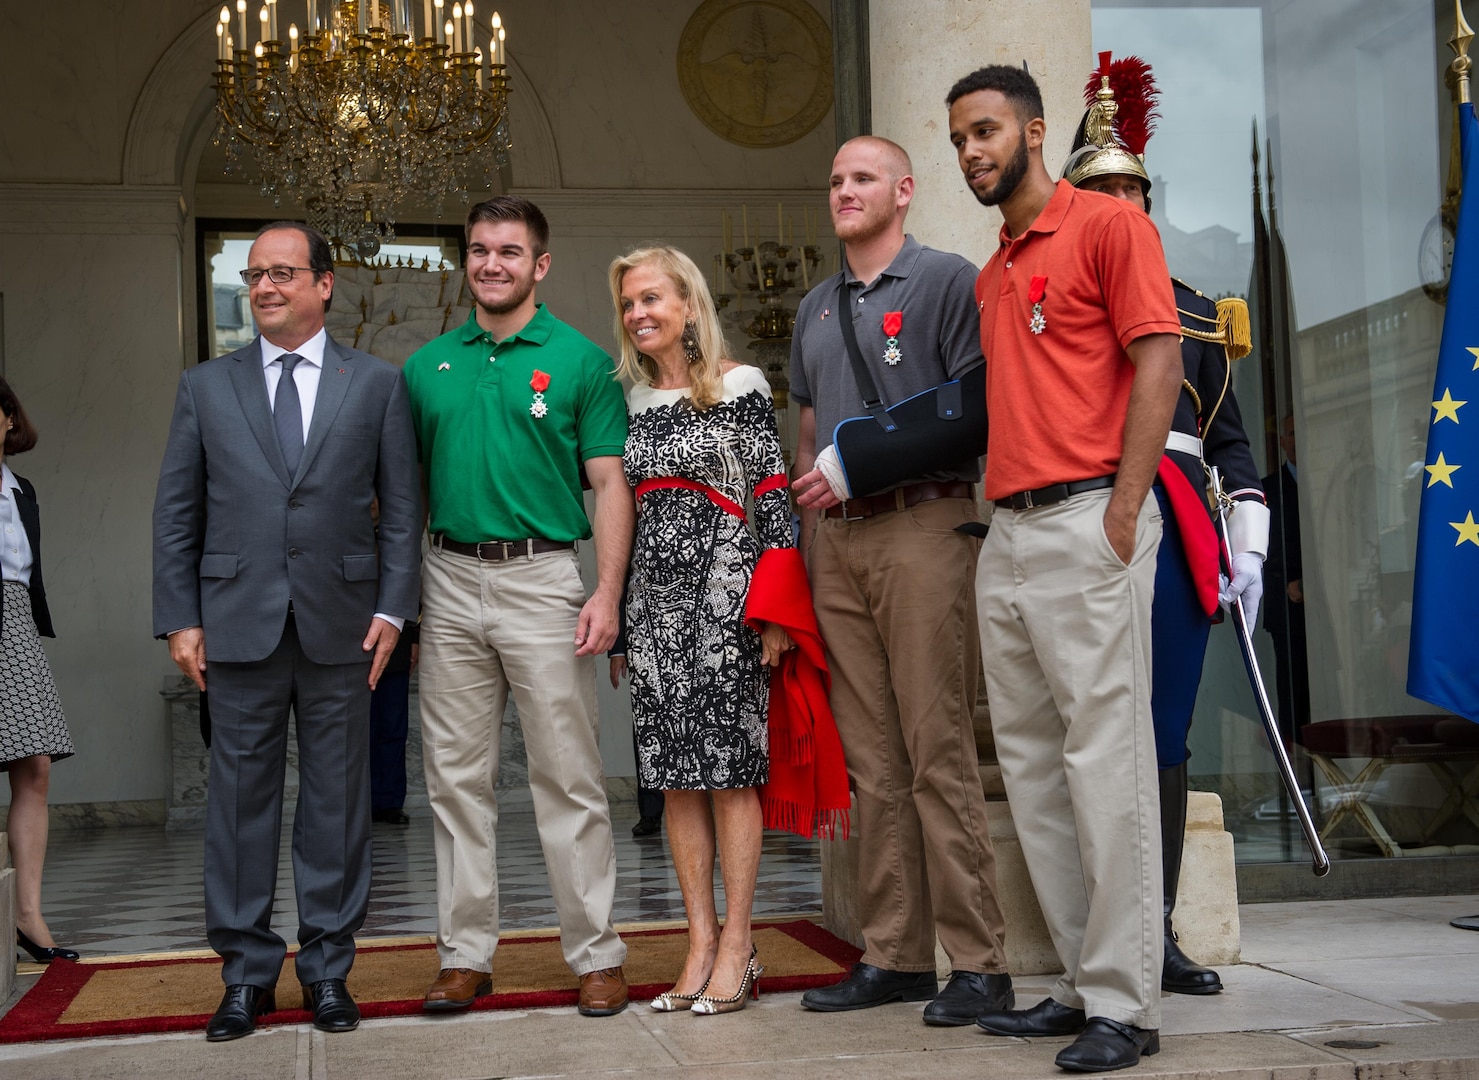 Spc. Alek Skarlatos, green shirt, with the Oregon Army National Guard’s 41st Infantry Brigade Combat Team, stands with French President François Hollande, left, Jane Hartley, U.S. ambassador to France, and friends Air Force Airman 1st Class Spencer Stone, with cast, and Anthony Sadler after a ceremony Monday at the Élysée in Paris where they received the Legion of Honor, France’s highest award, for their actions in subduing an attacker on a Paris-bound train armed with an assault rifle and other weapons. The three friends, with the help of a British passenger, tackled and subdued the gunman when he stopped to reload after opening fire in an adjacent car. (U.S. Air Force photo/Tech. Sgt. Ryan Crane)